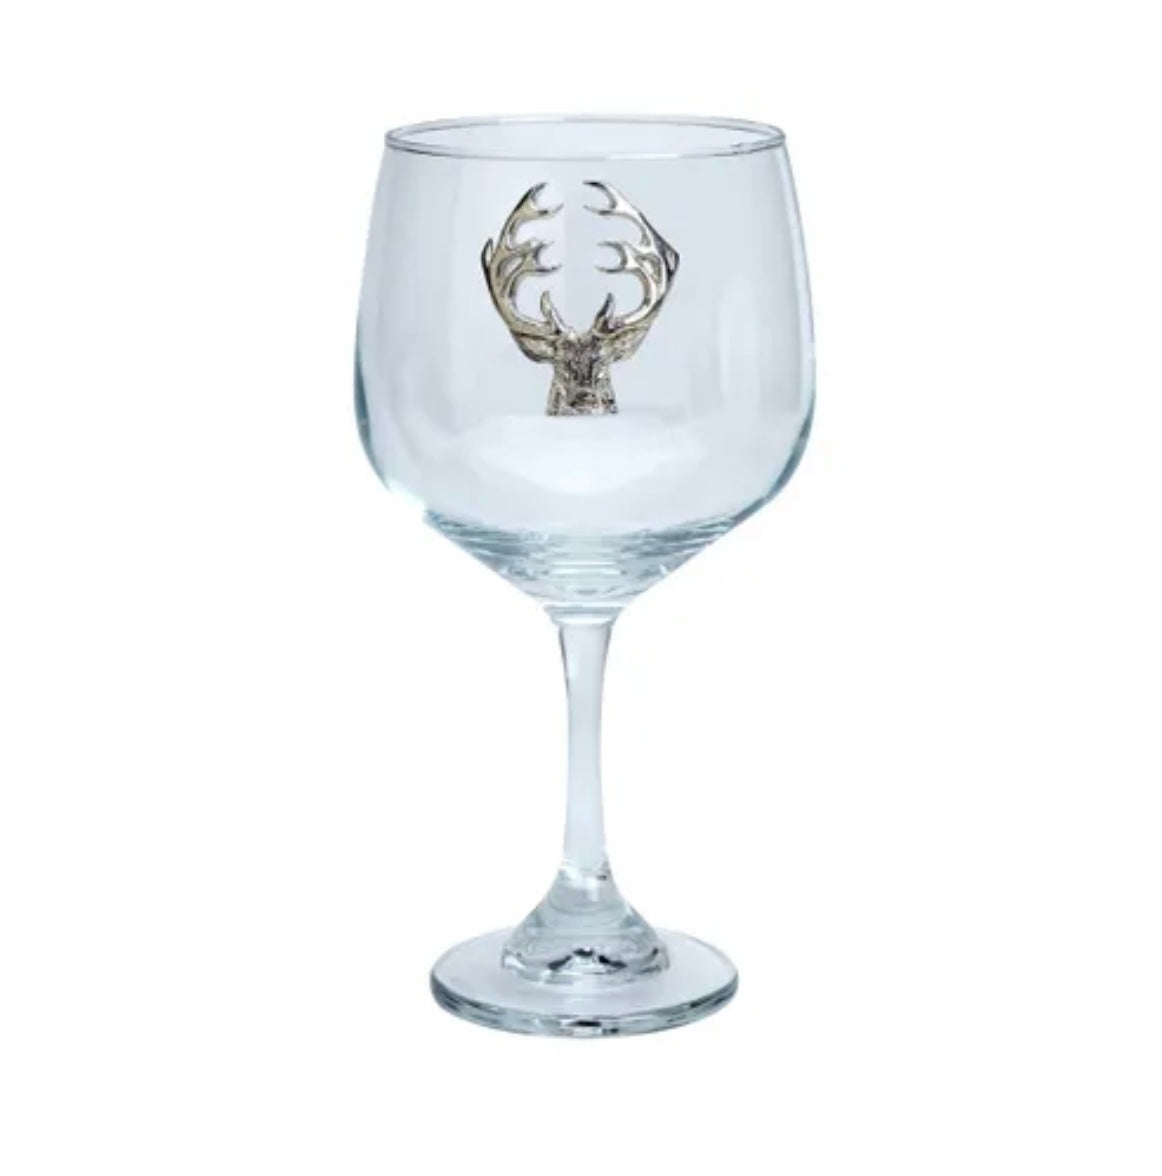 Balloon Gin Glass with Pewter Design